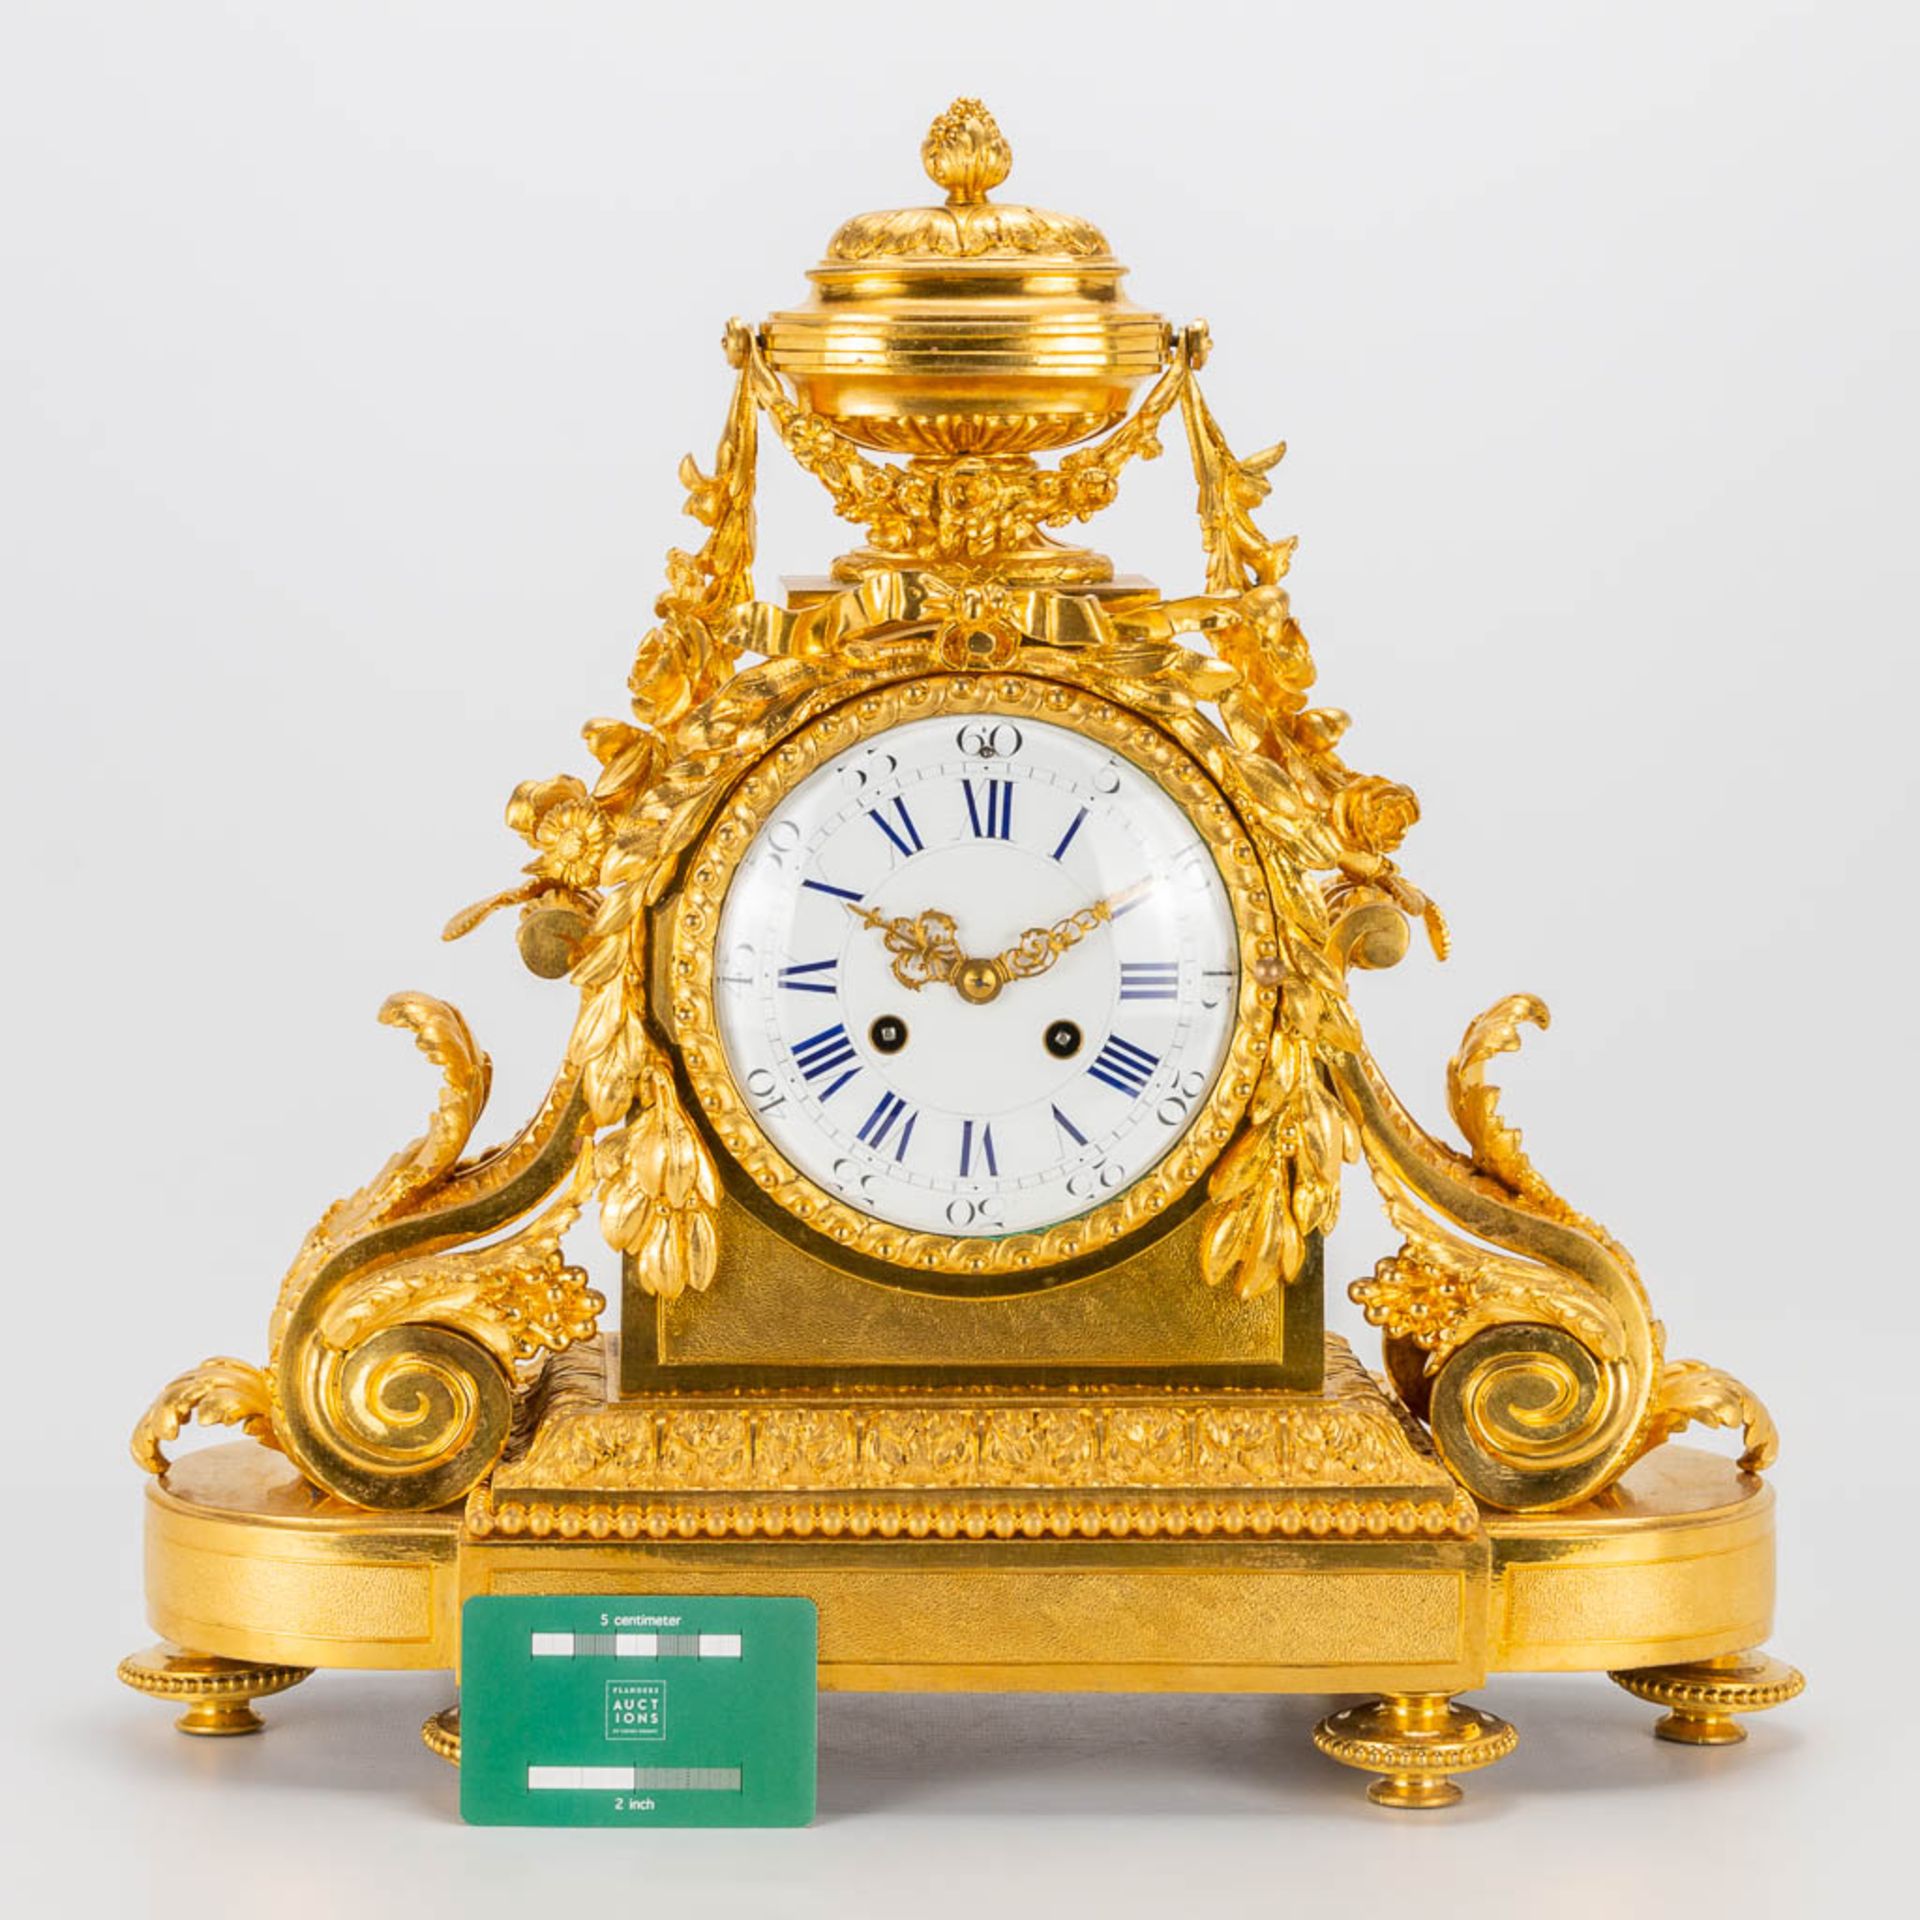 A bronze ormolu table clock made in Louis XVI style. 19th century. (15 x 41 x 42 cm) - Image 5 of 20